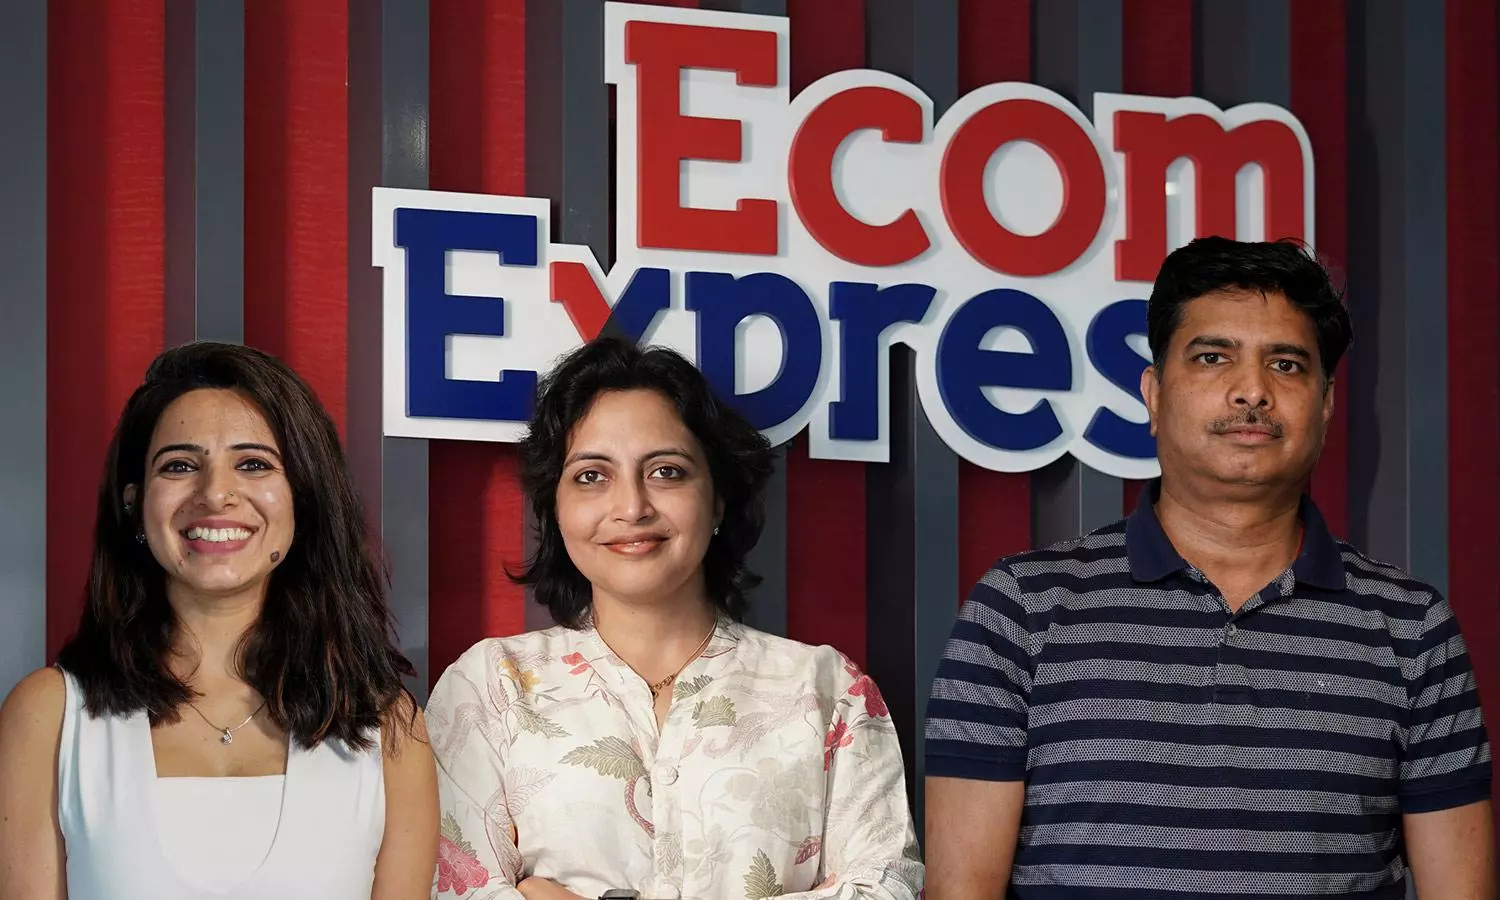 Ecom Express bolsters leadership team with key appointments